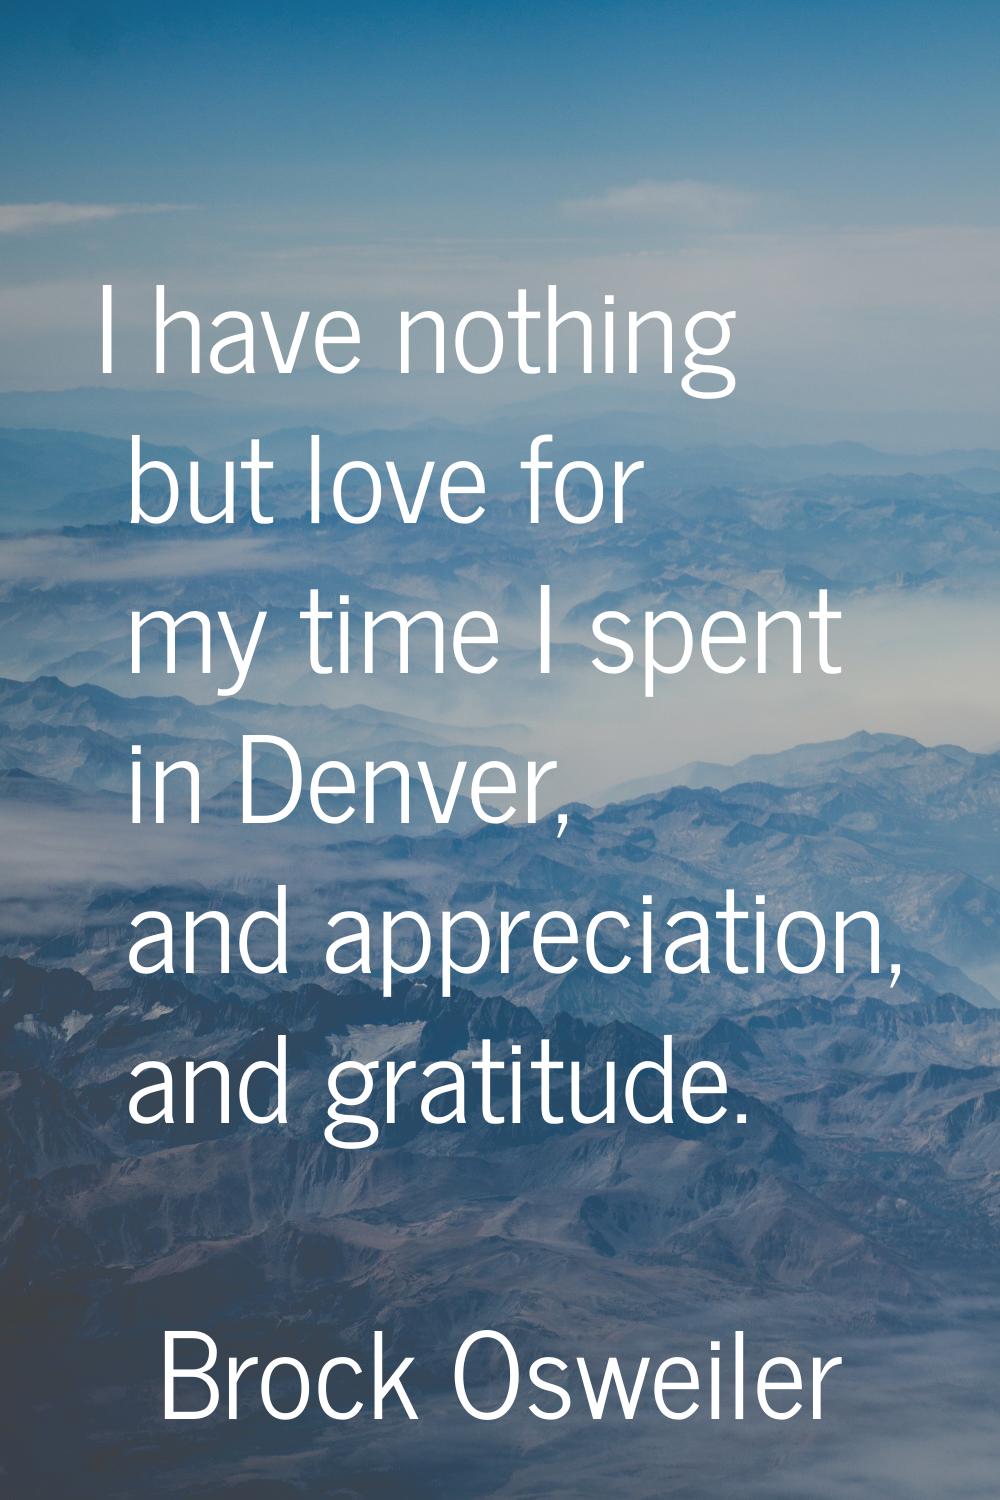 I have nothing but love for my time I spent in Denver, and appreciation, and gratitude.